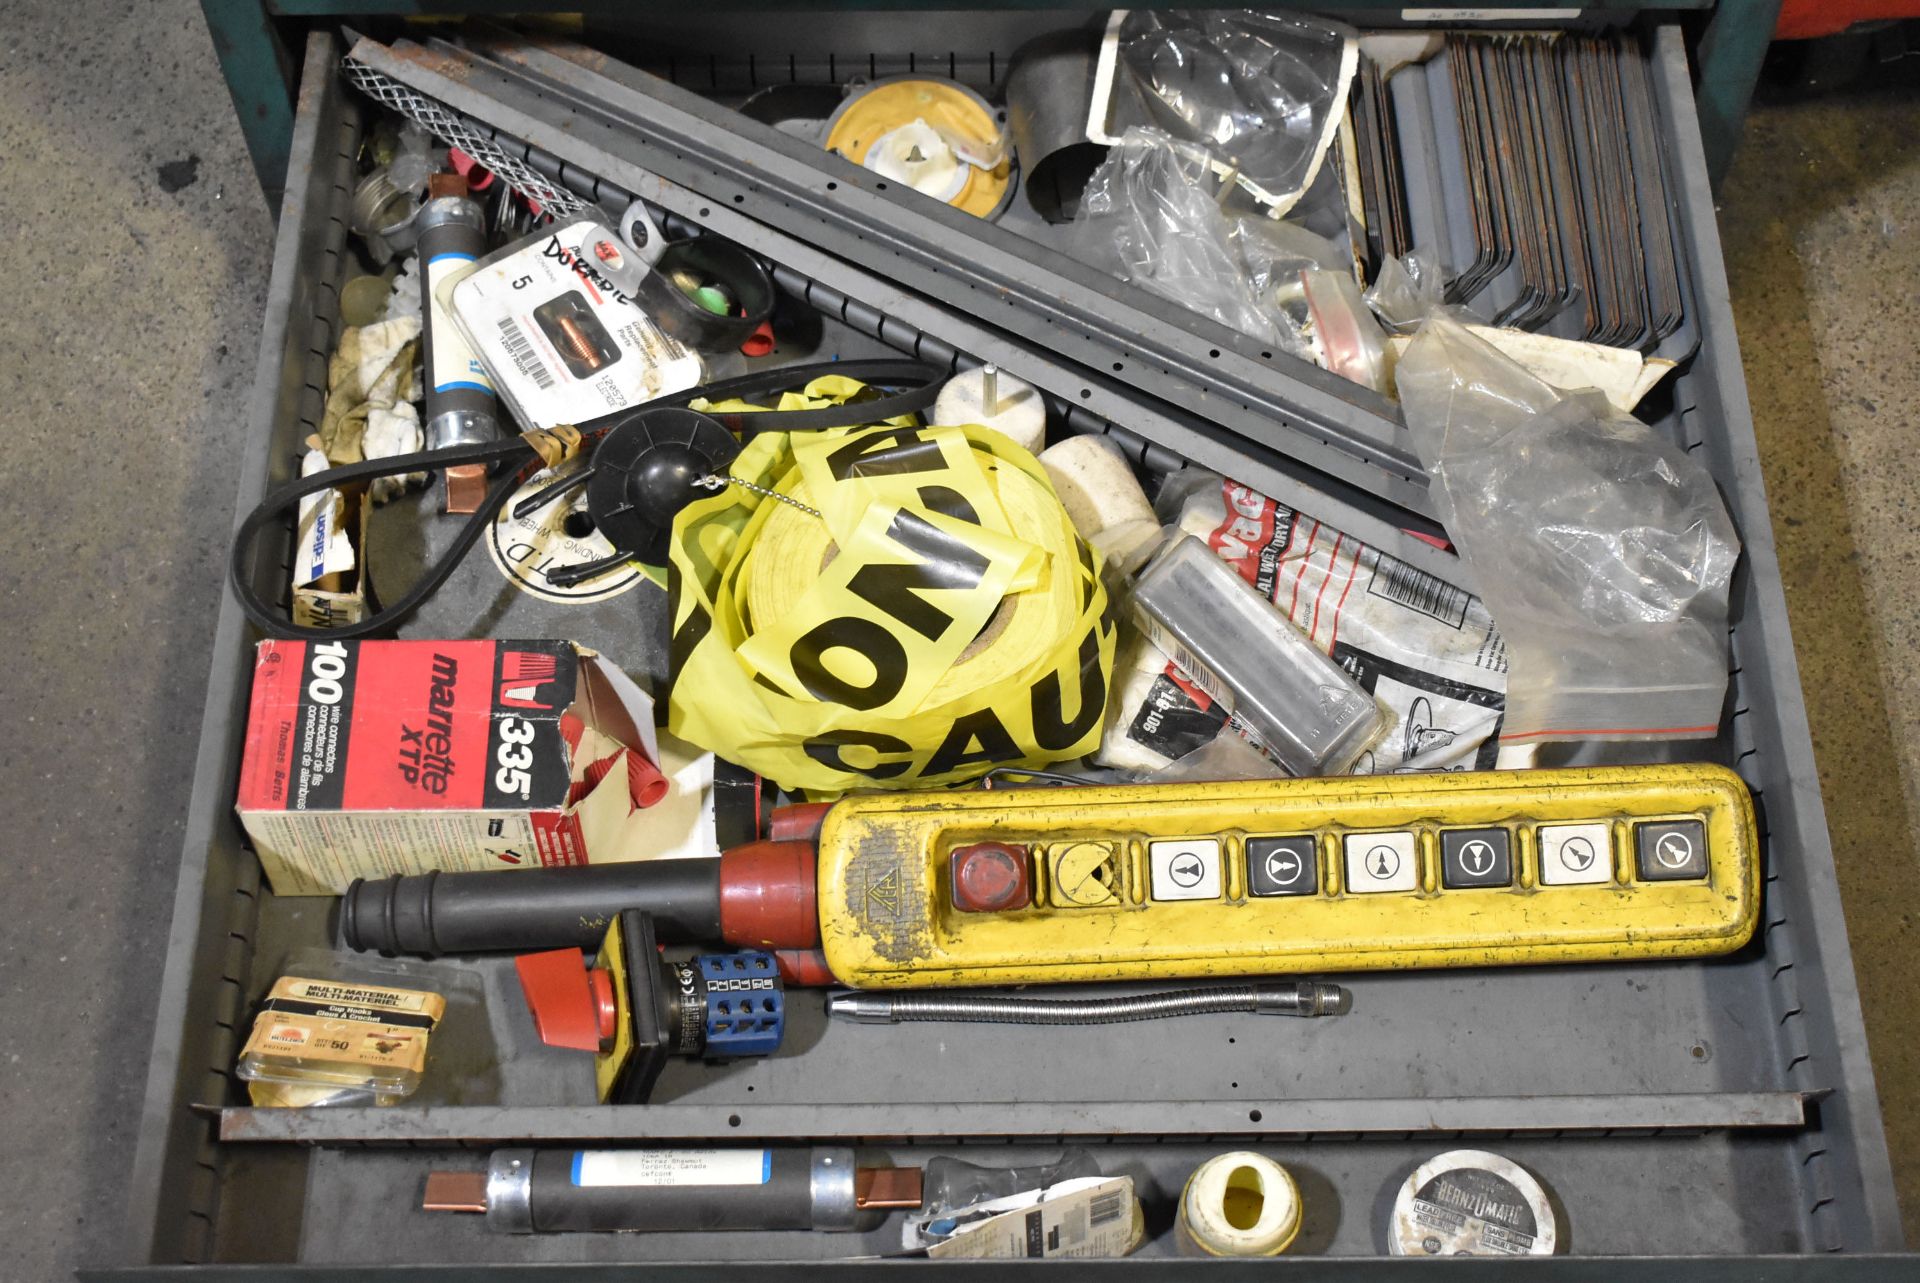 LOT/ CONTENTS OF TOOL CABINET - INCLUDING TAPS, REAMERS, DRILLS, SANDING & GRINDING PERISHABLES, - Image 10 of 10